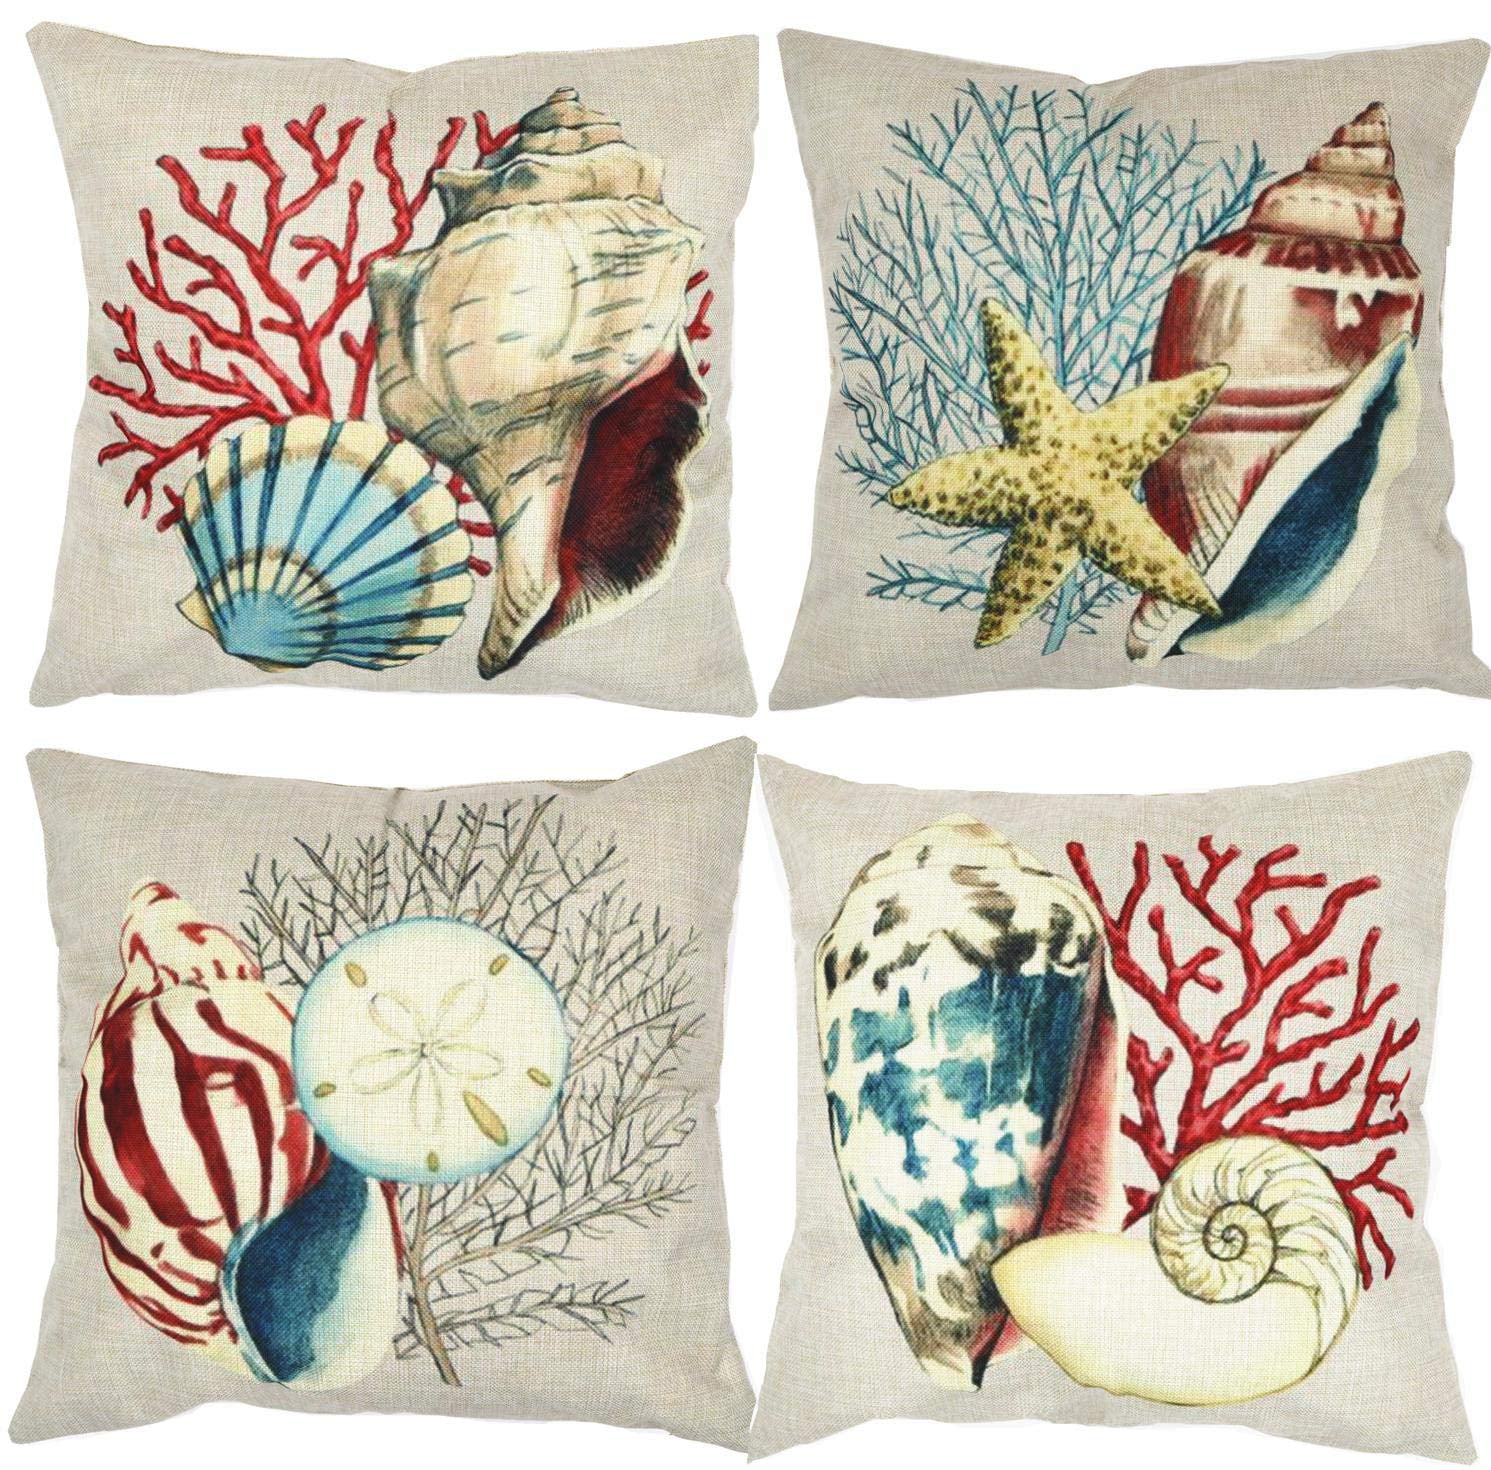 Set of 4 Square Throw Pillow Case Cotton Linen Cushion Covers Car Sofa Bed Couch